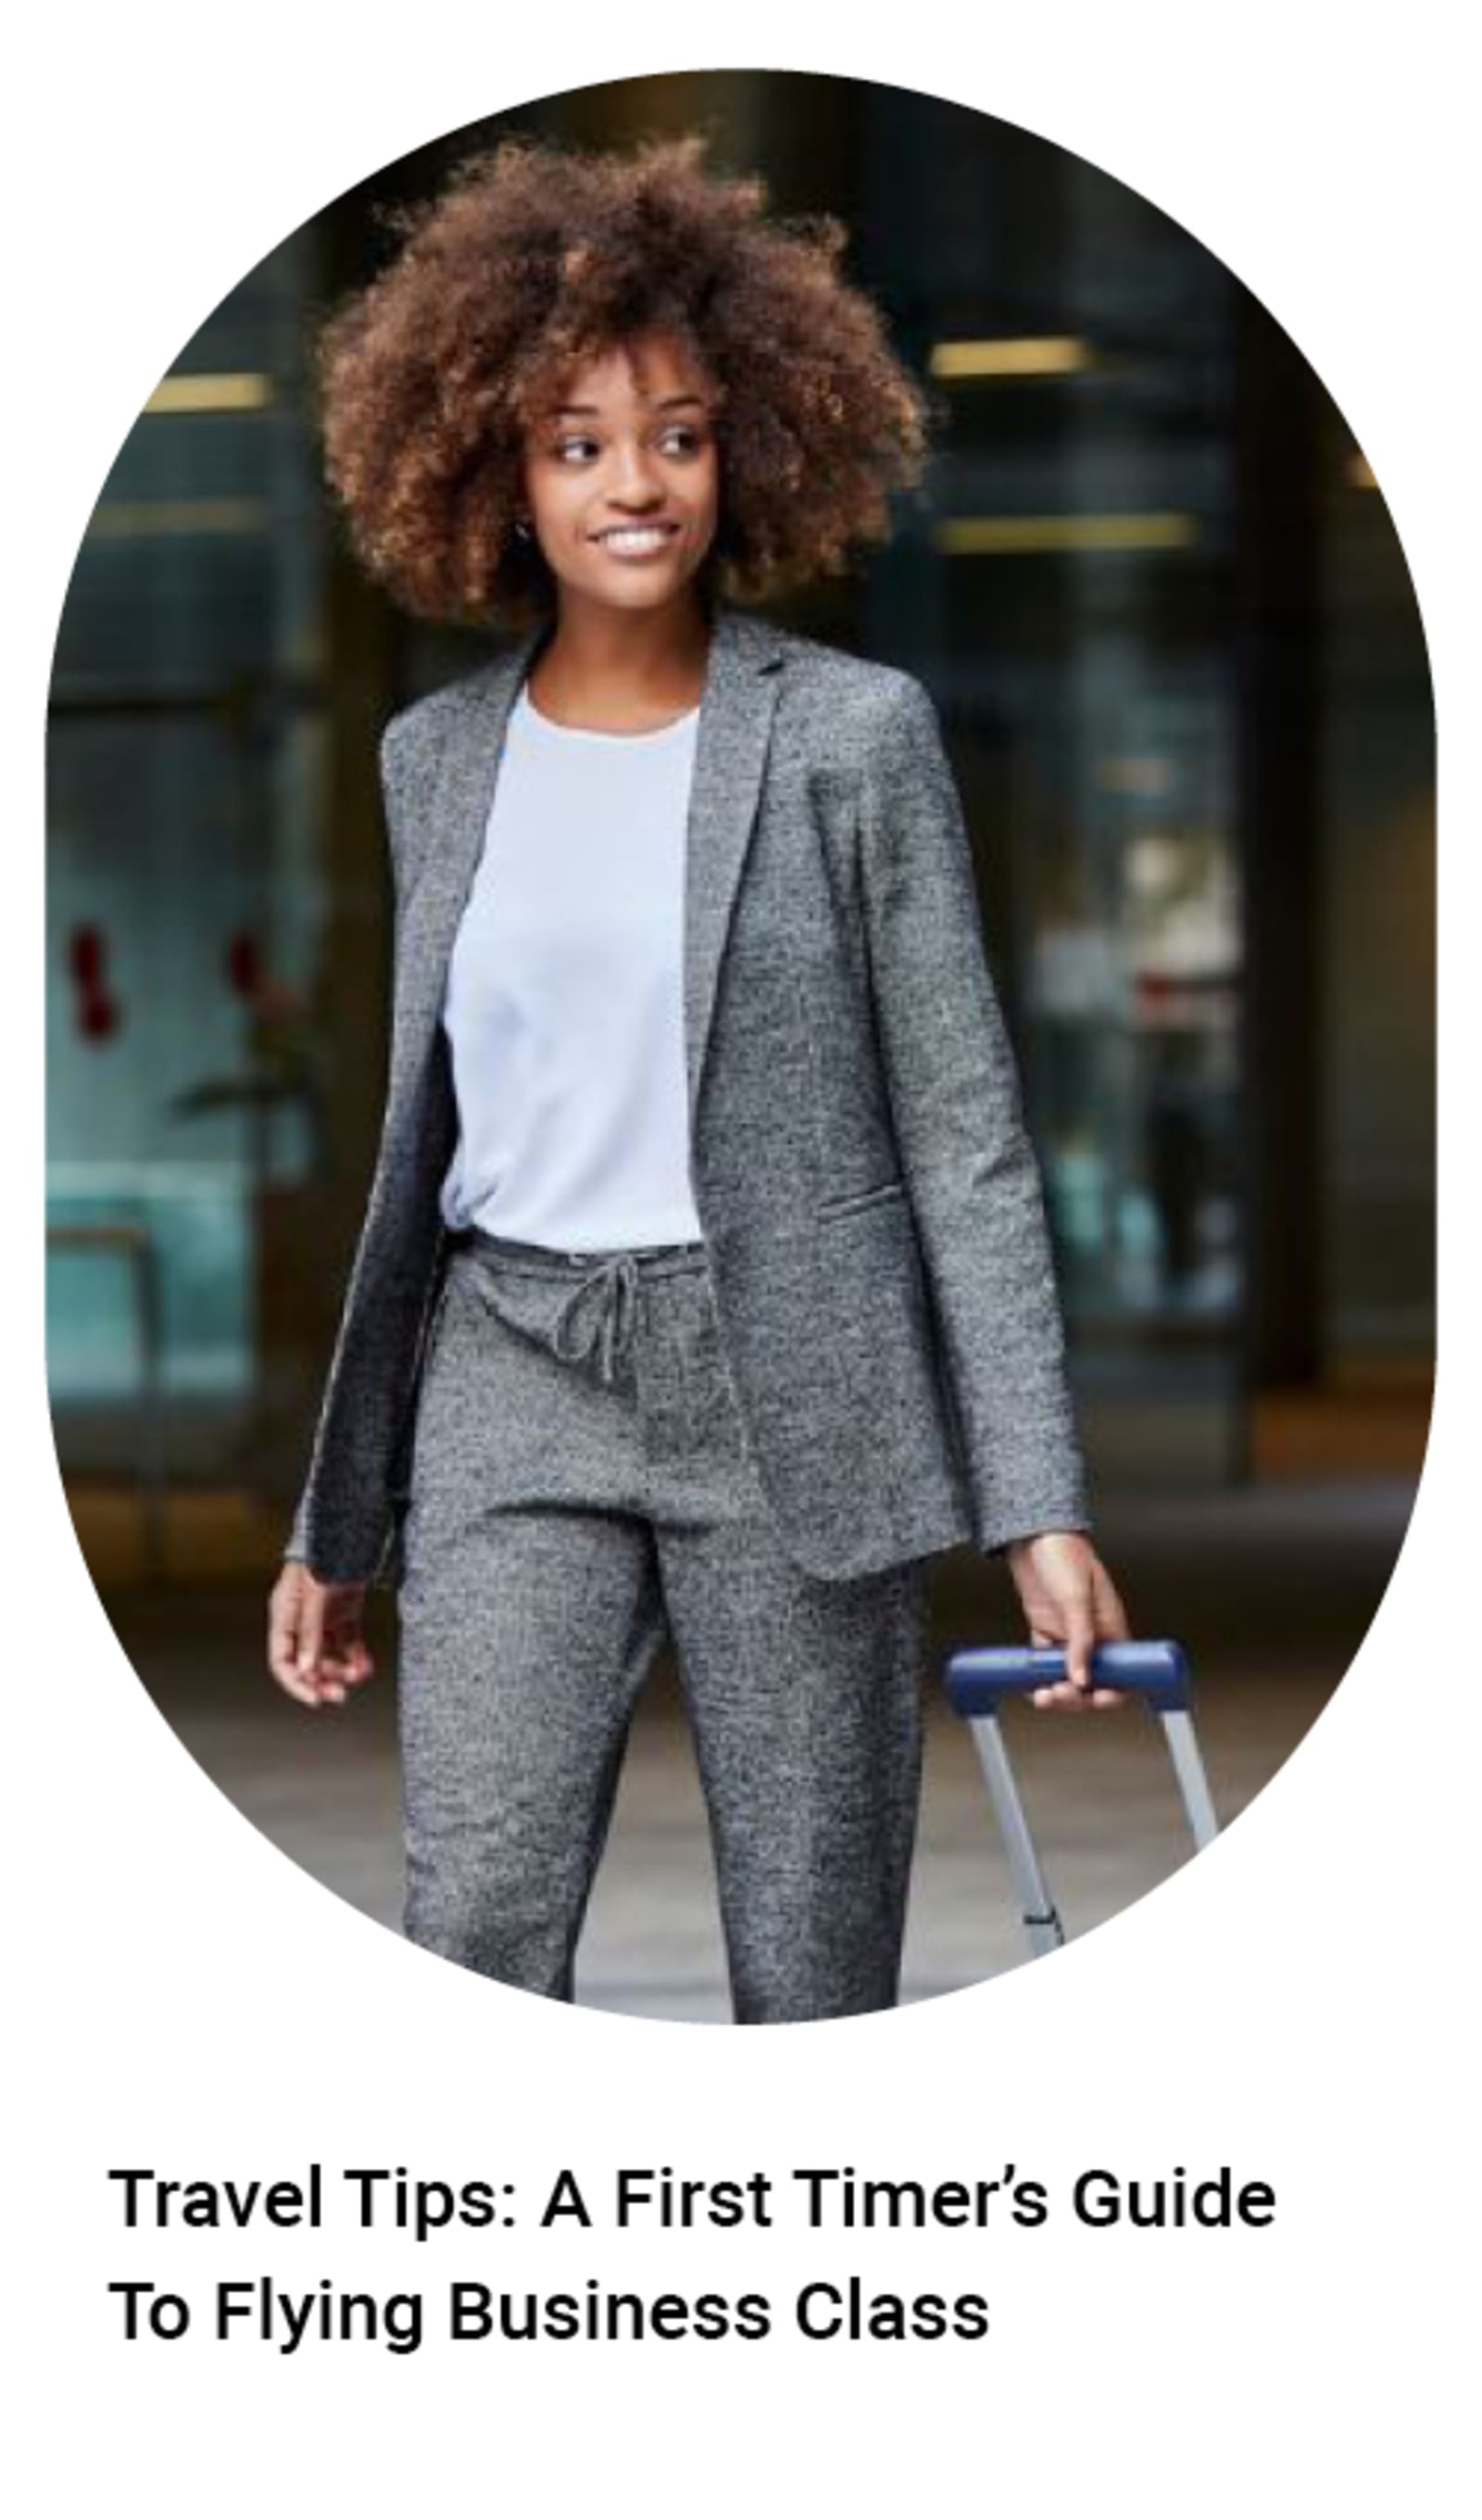 Businesswoman in a grey suit walking - Travel tips: a first timer's guide to flying business class